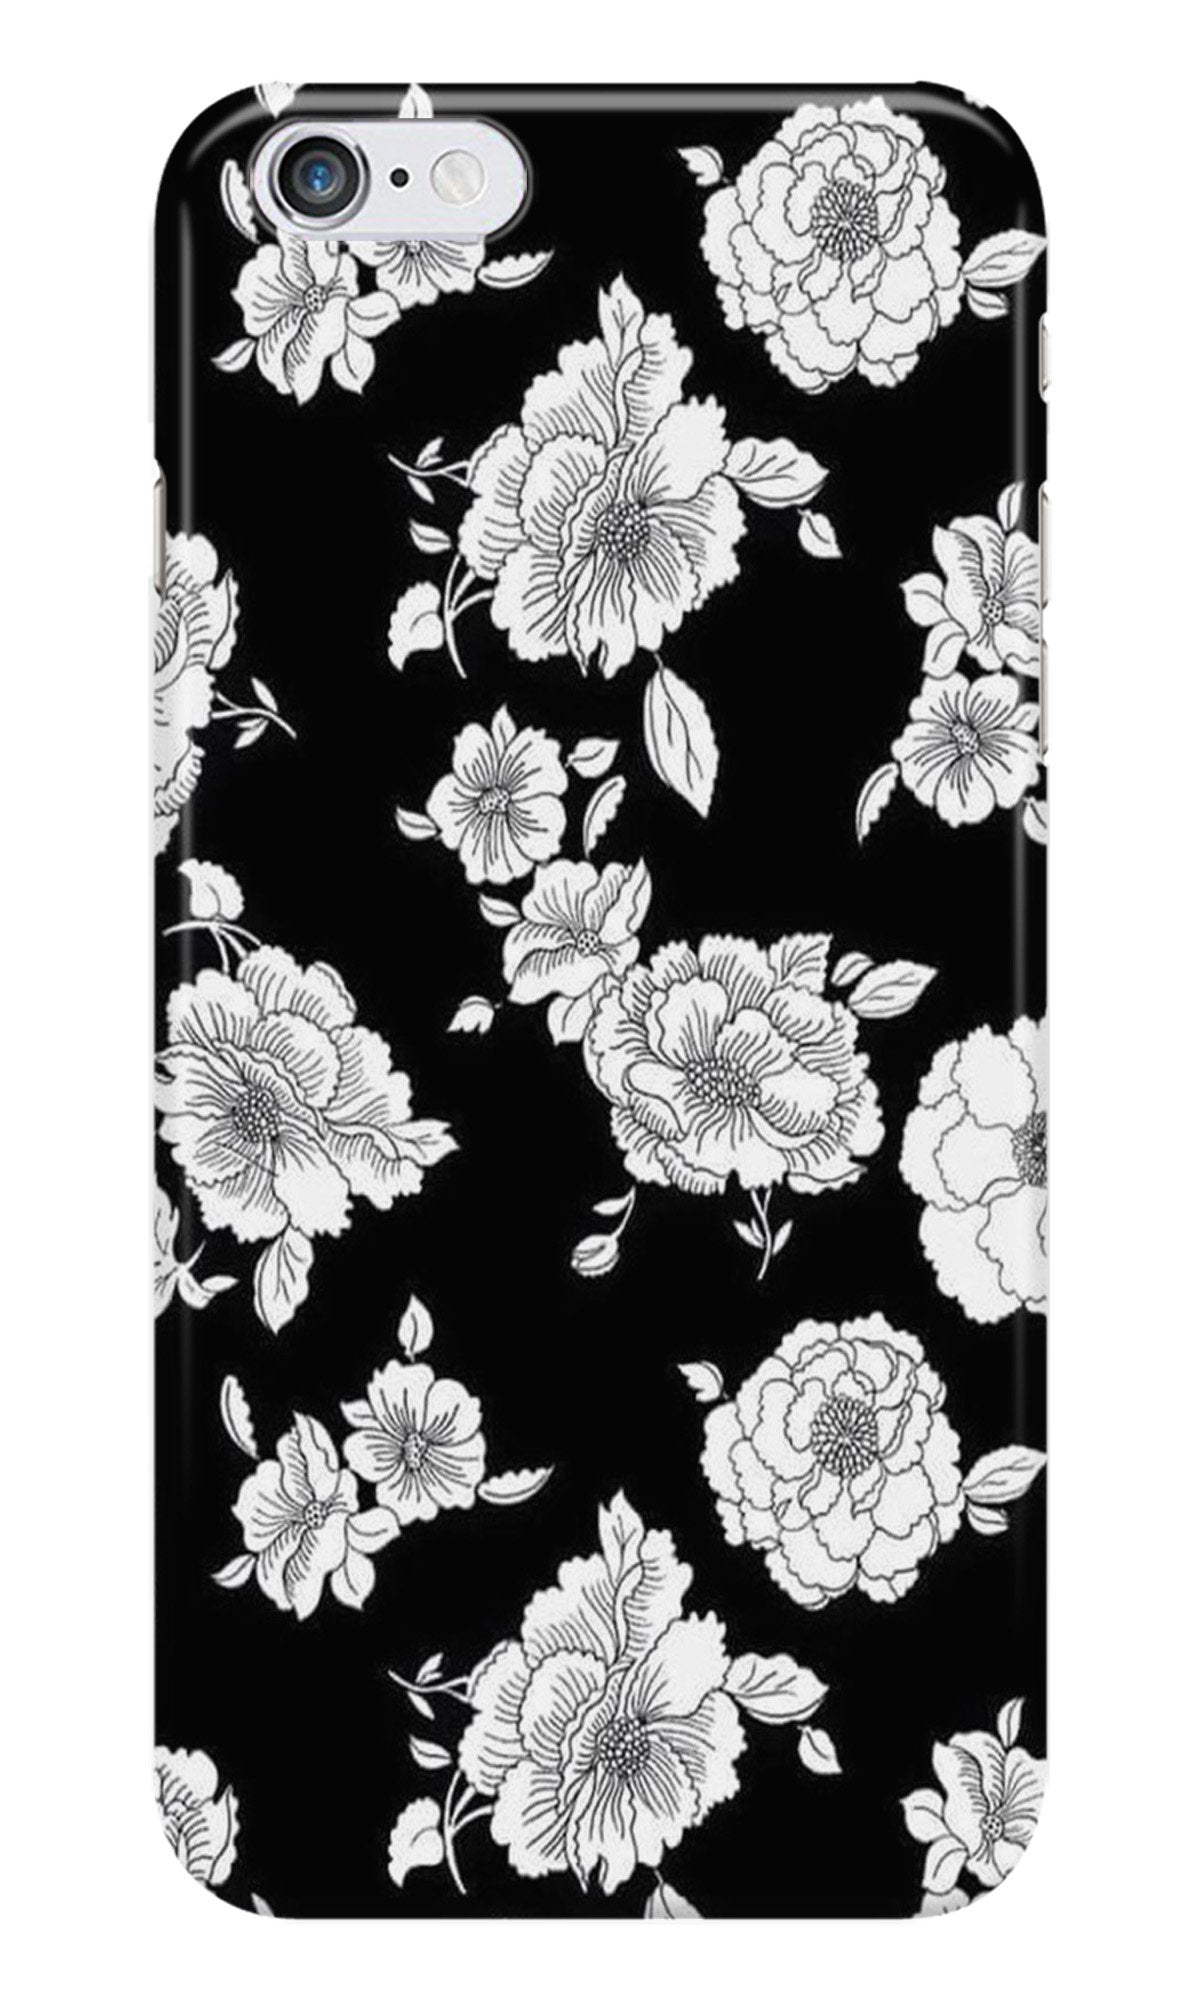 White flowers Black Background Case for iPhone 6 Plus/ 6s Plus